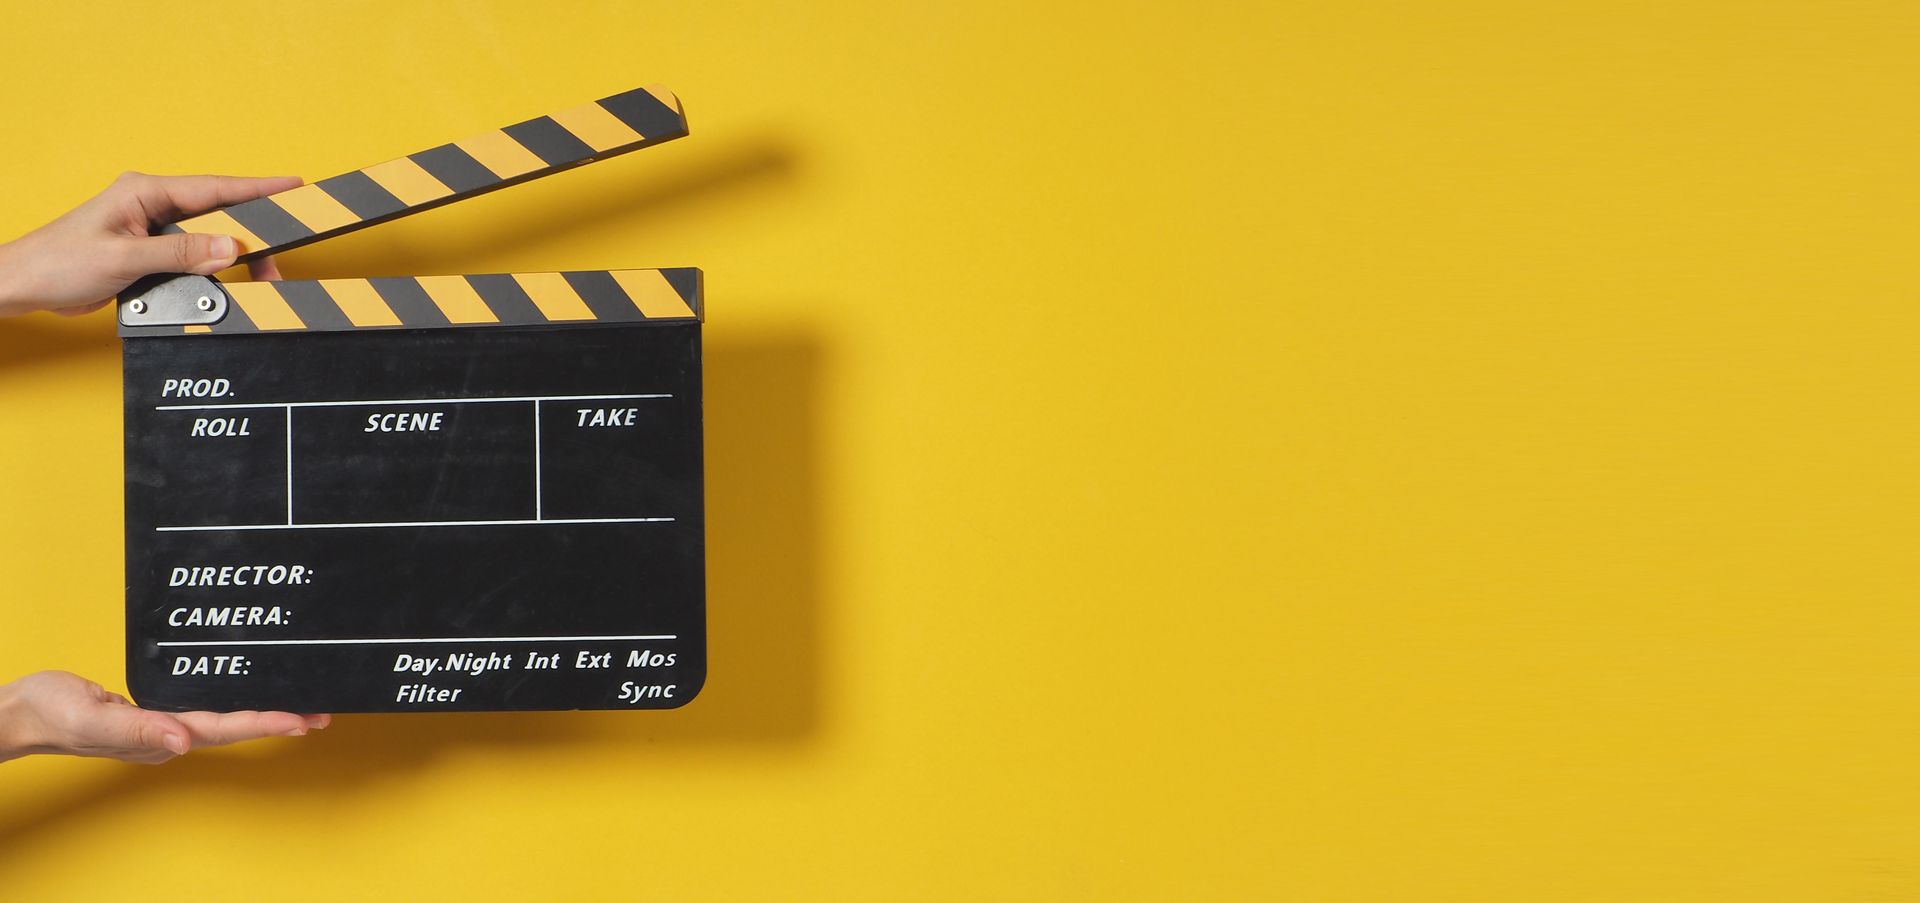 Movie board open on yellow background